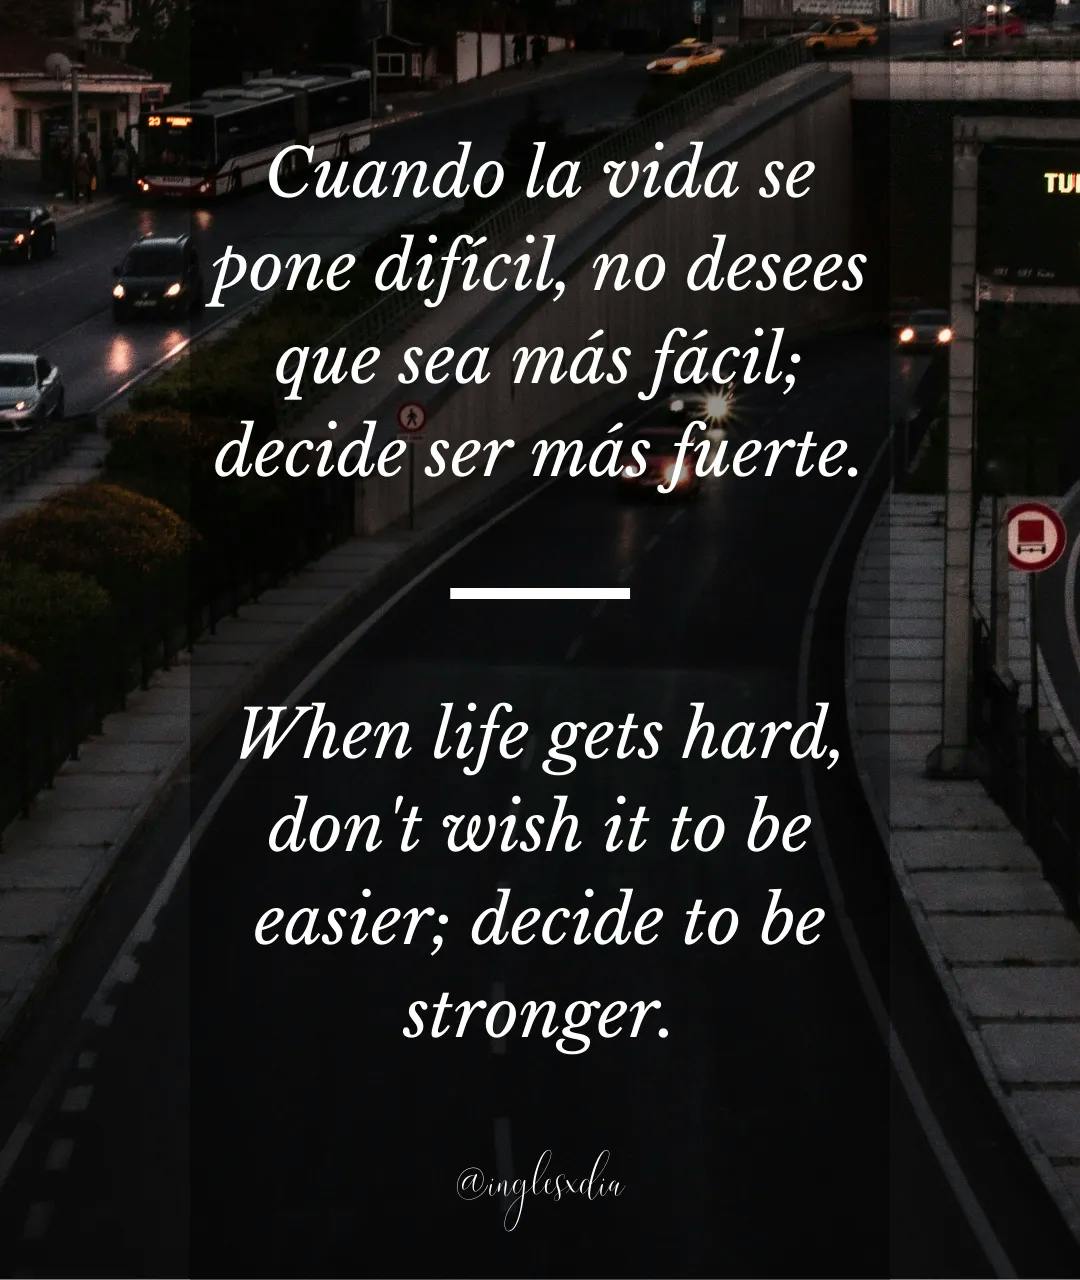 Frases motivadoras en inglés: When life gets hard, don't wish it to be easier; decide to be stronger.